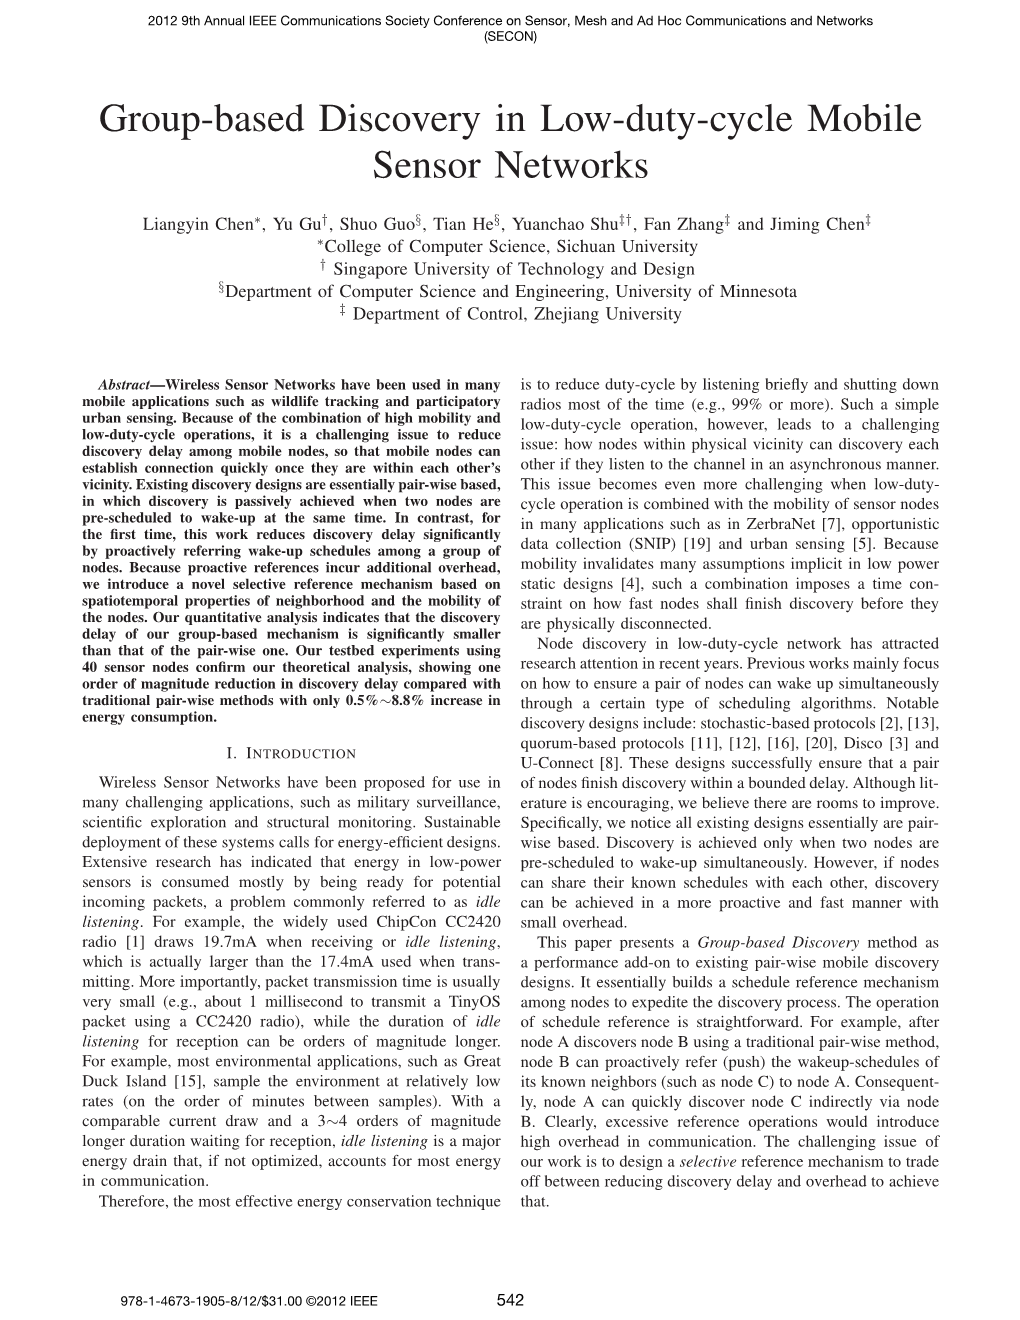 Group-Based Discovery in Low-Duty-Cycle Mobile Sensor Networks